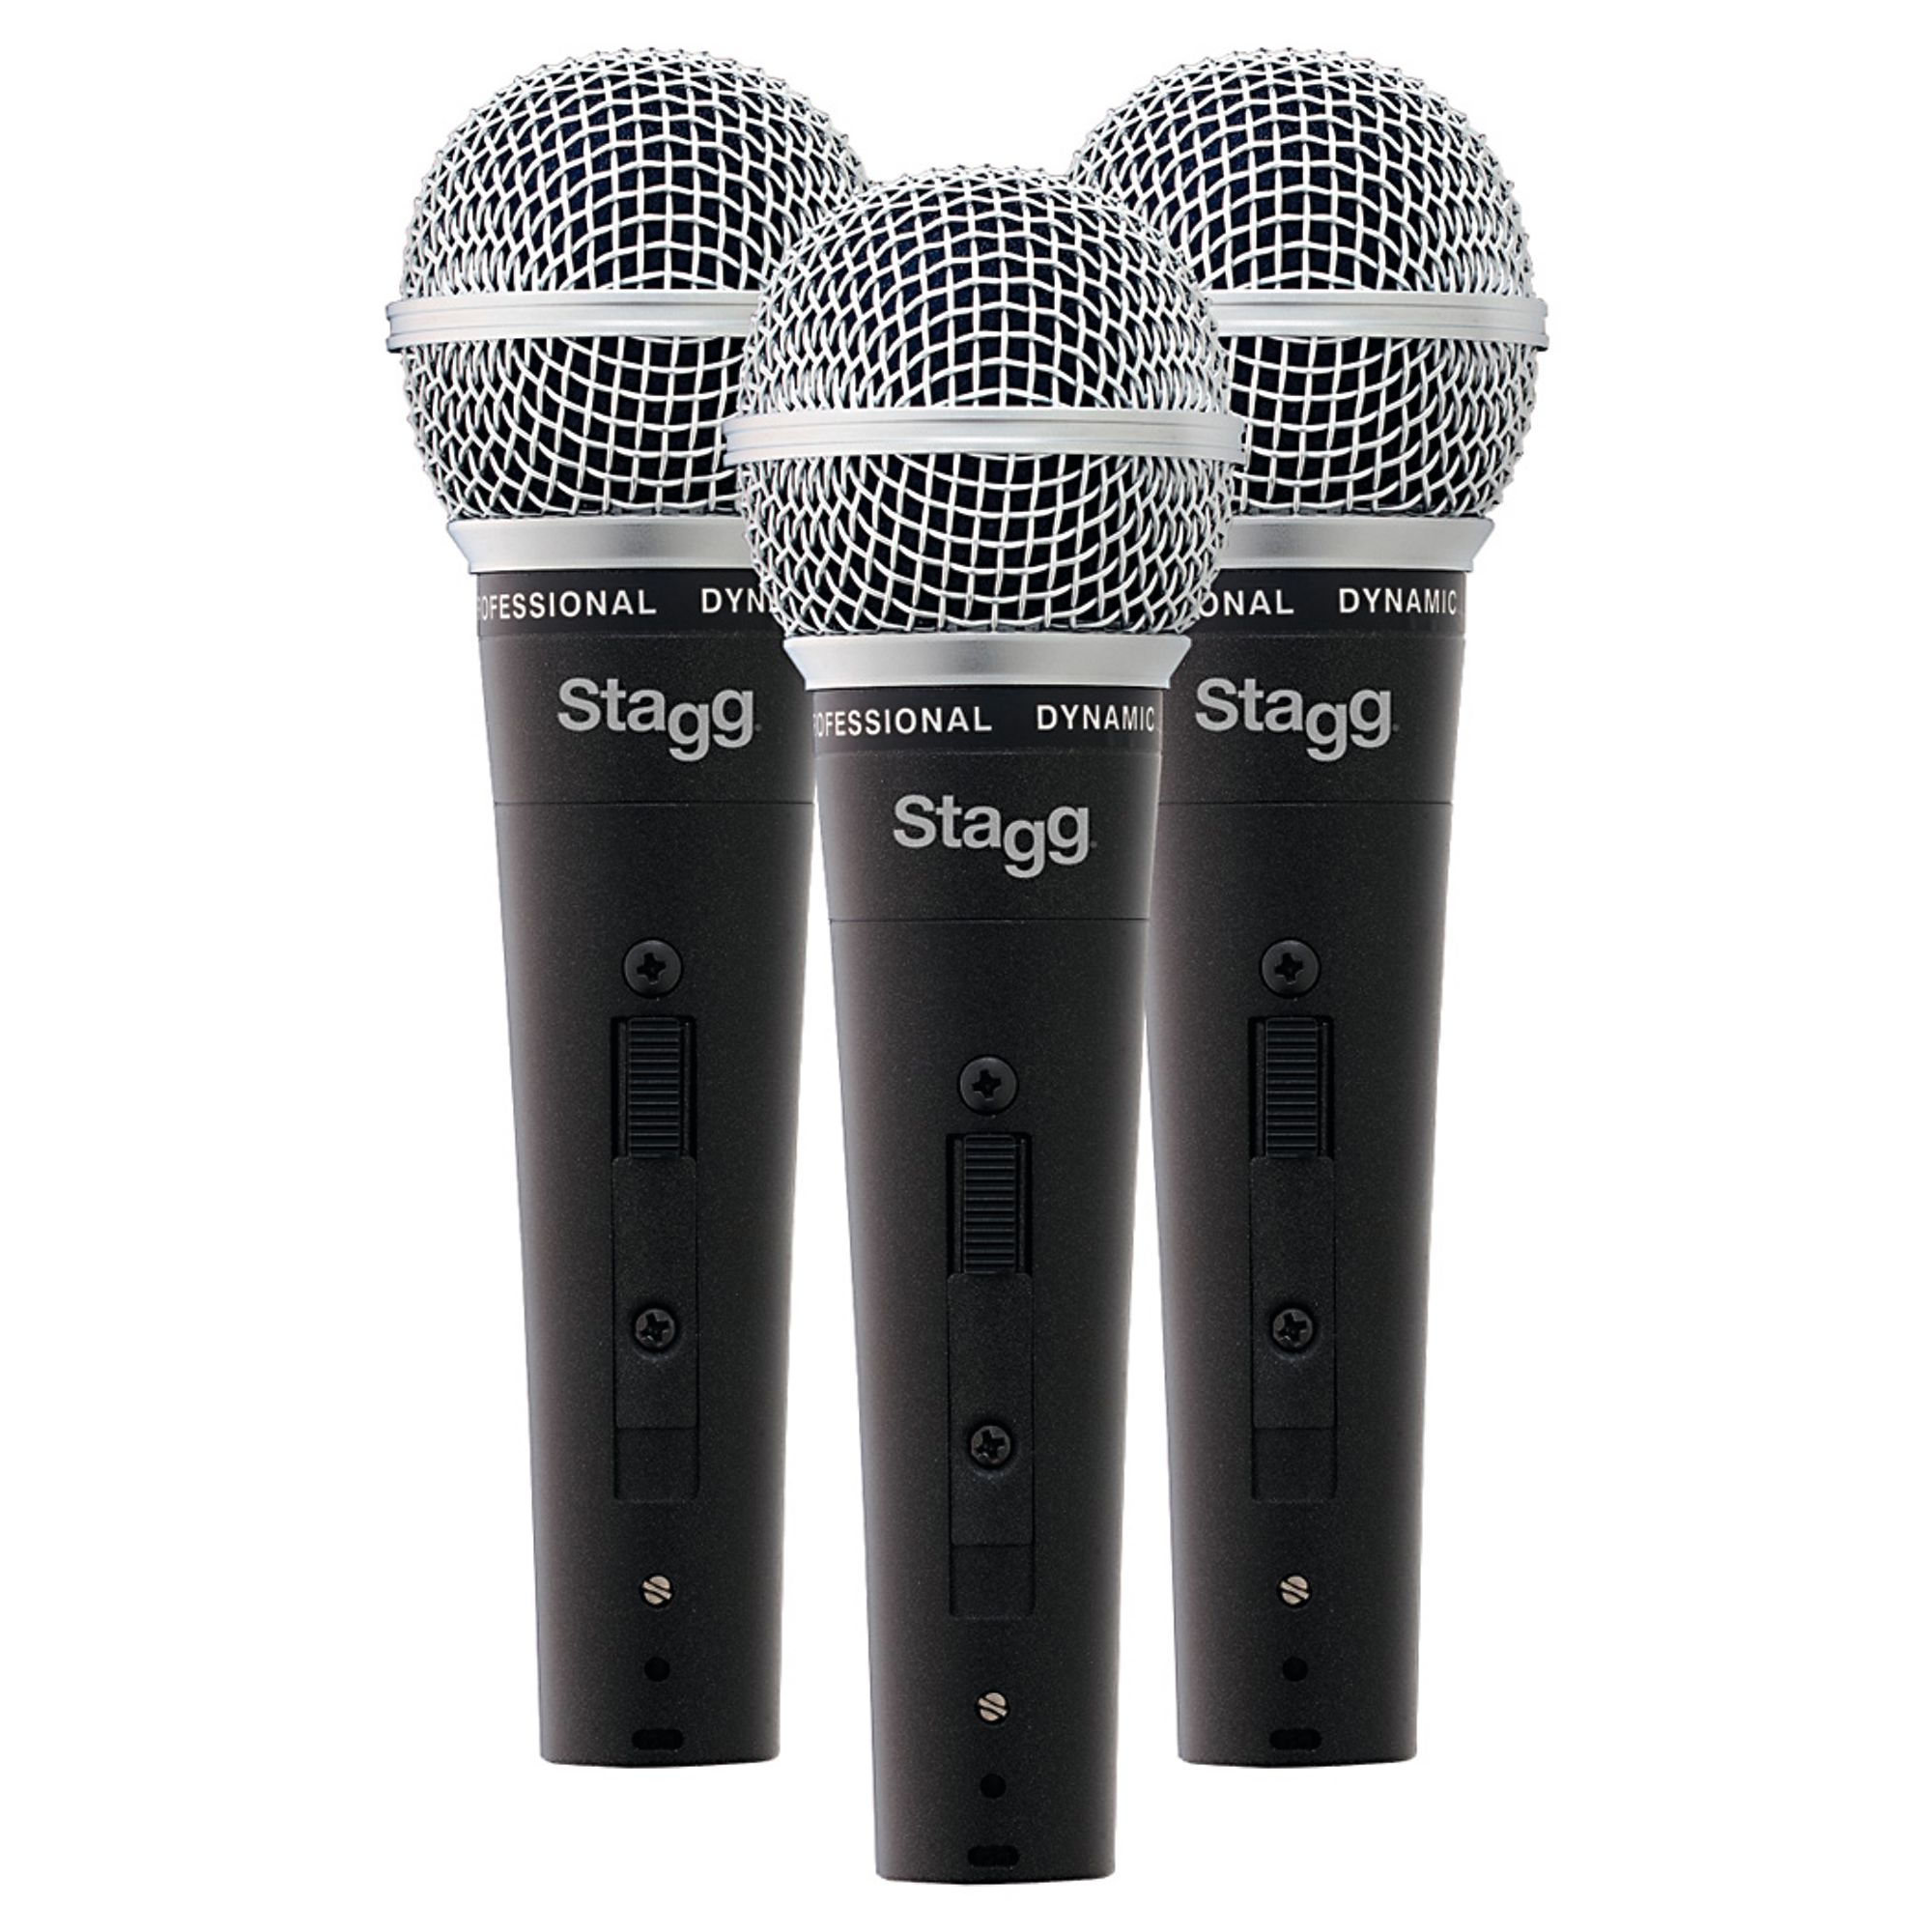 Stagg High Quality Dynamic Microphones